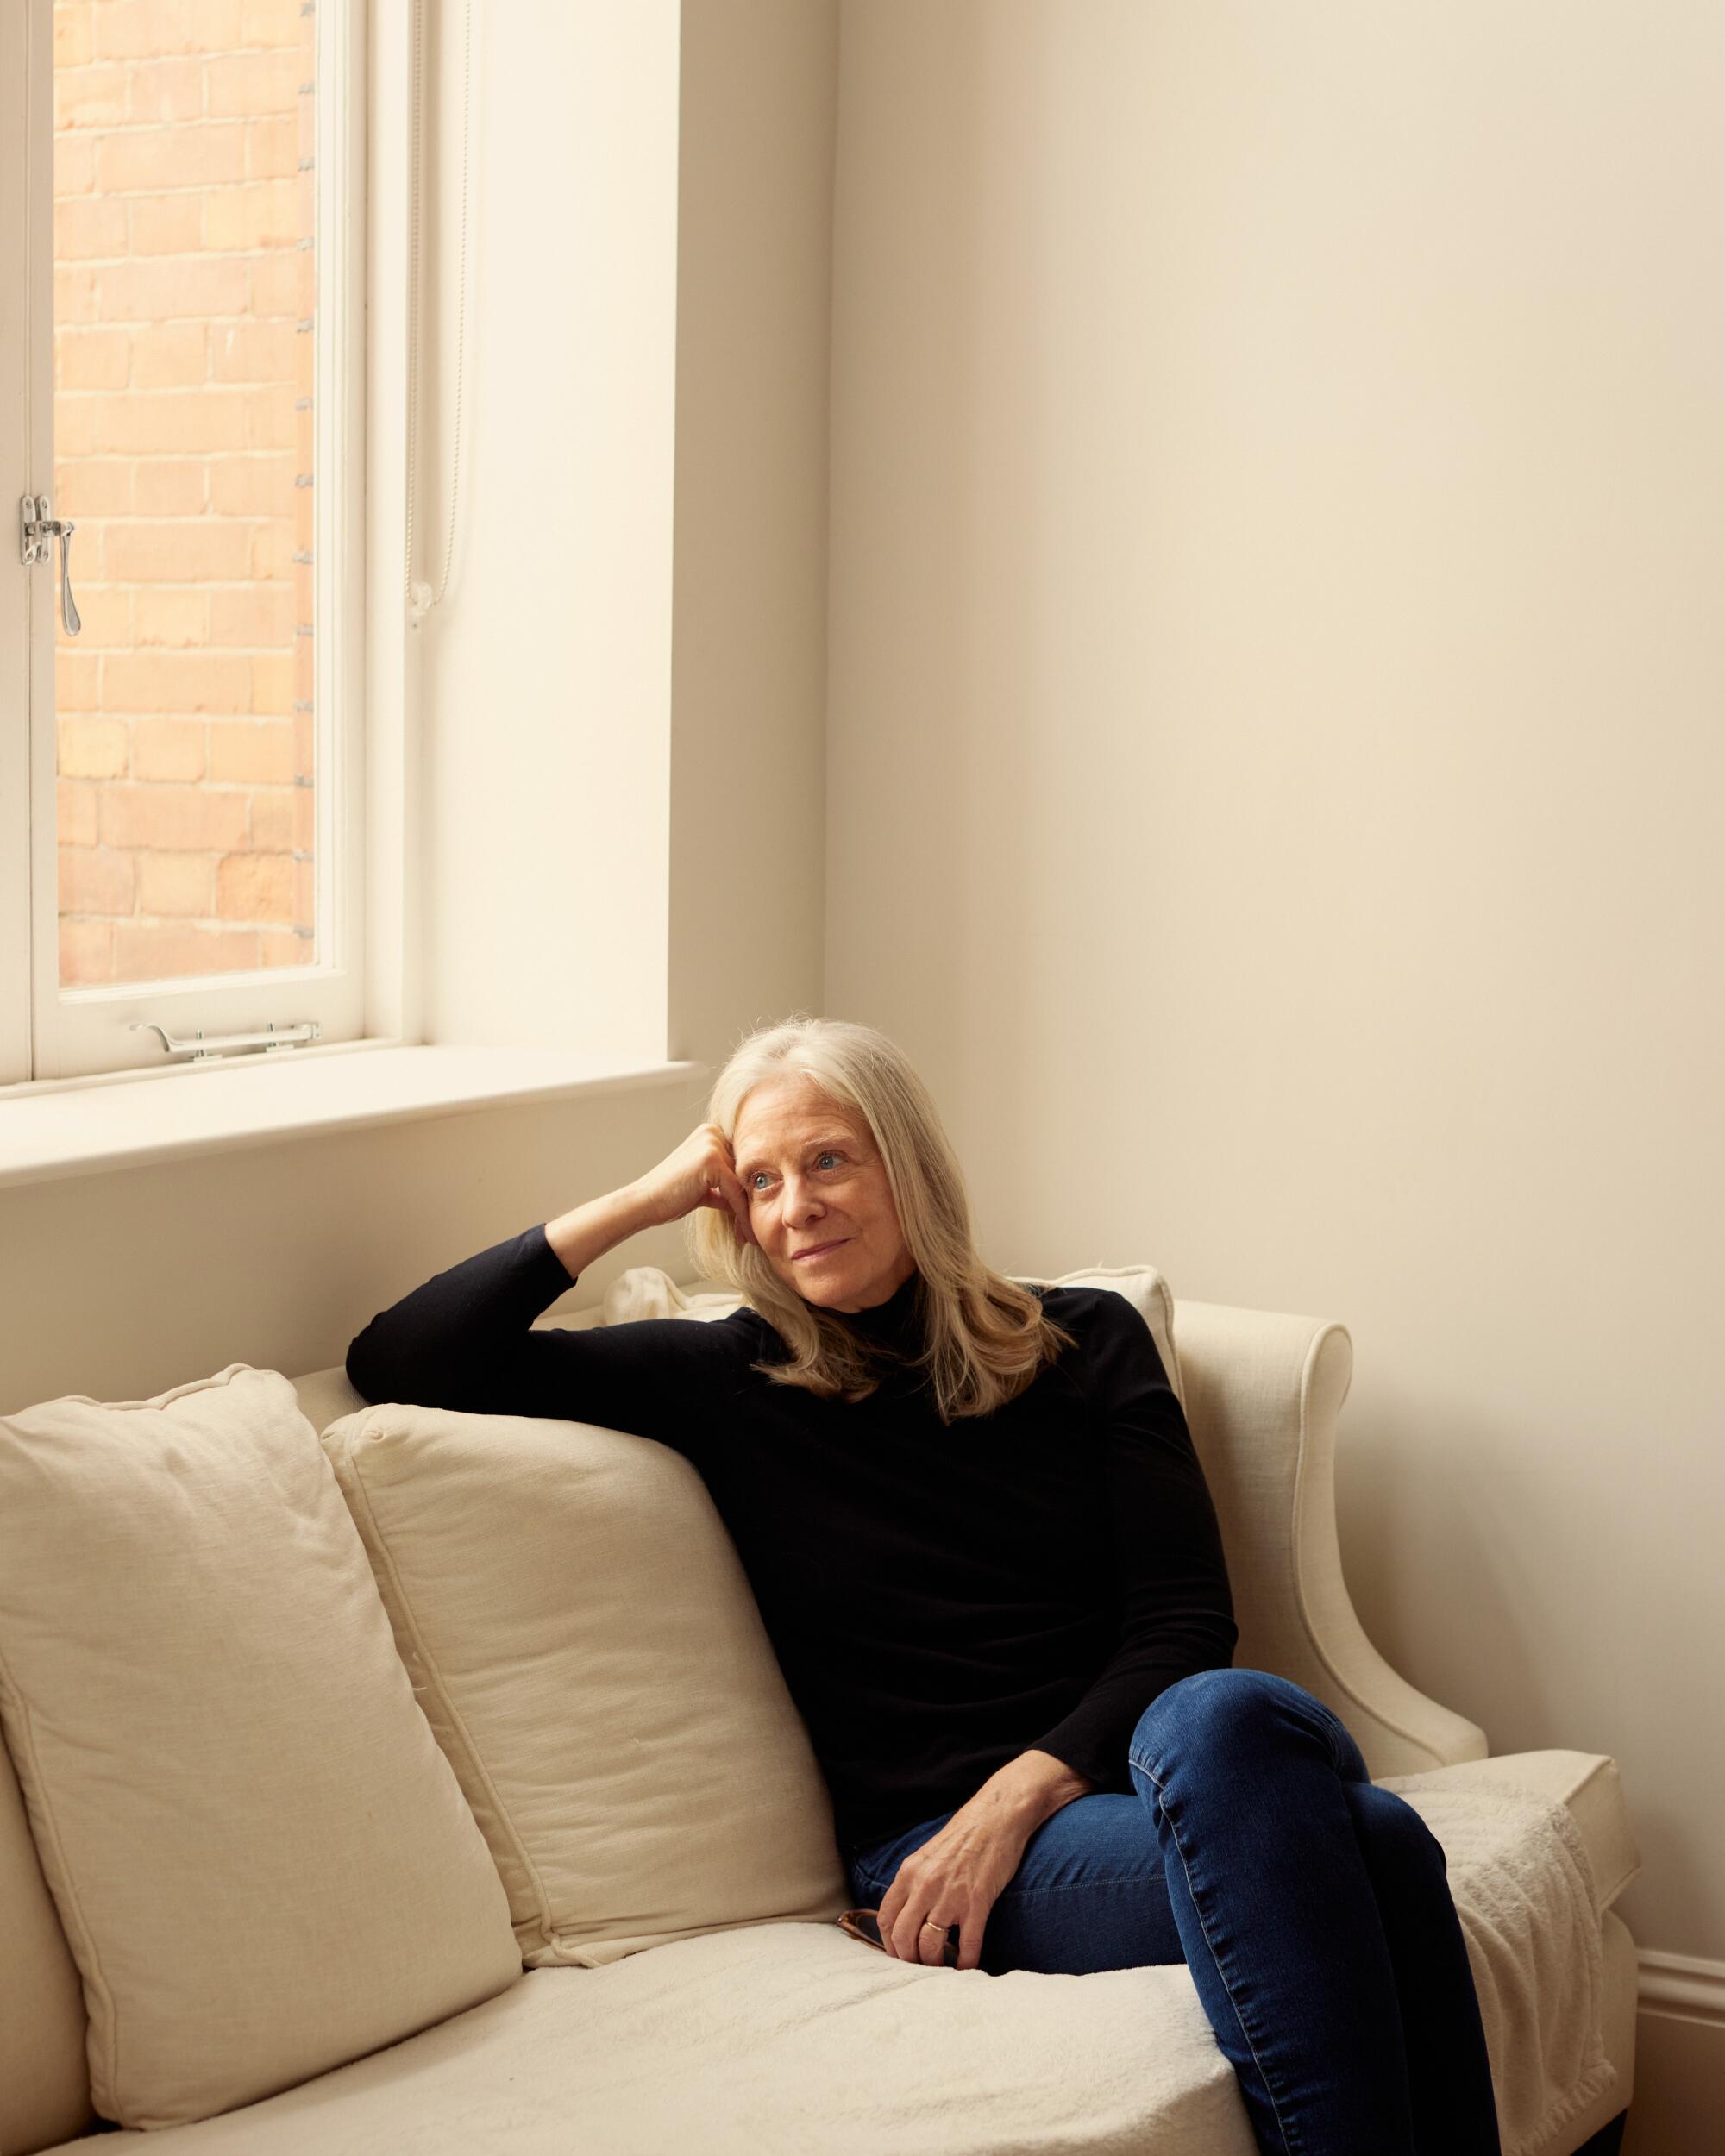 Bonnie Garmus sits on a white couch near a window in a black turtleneck and jeans.